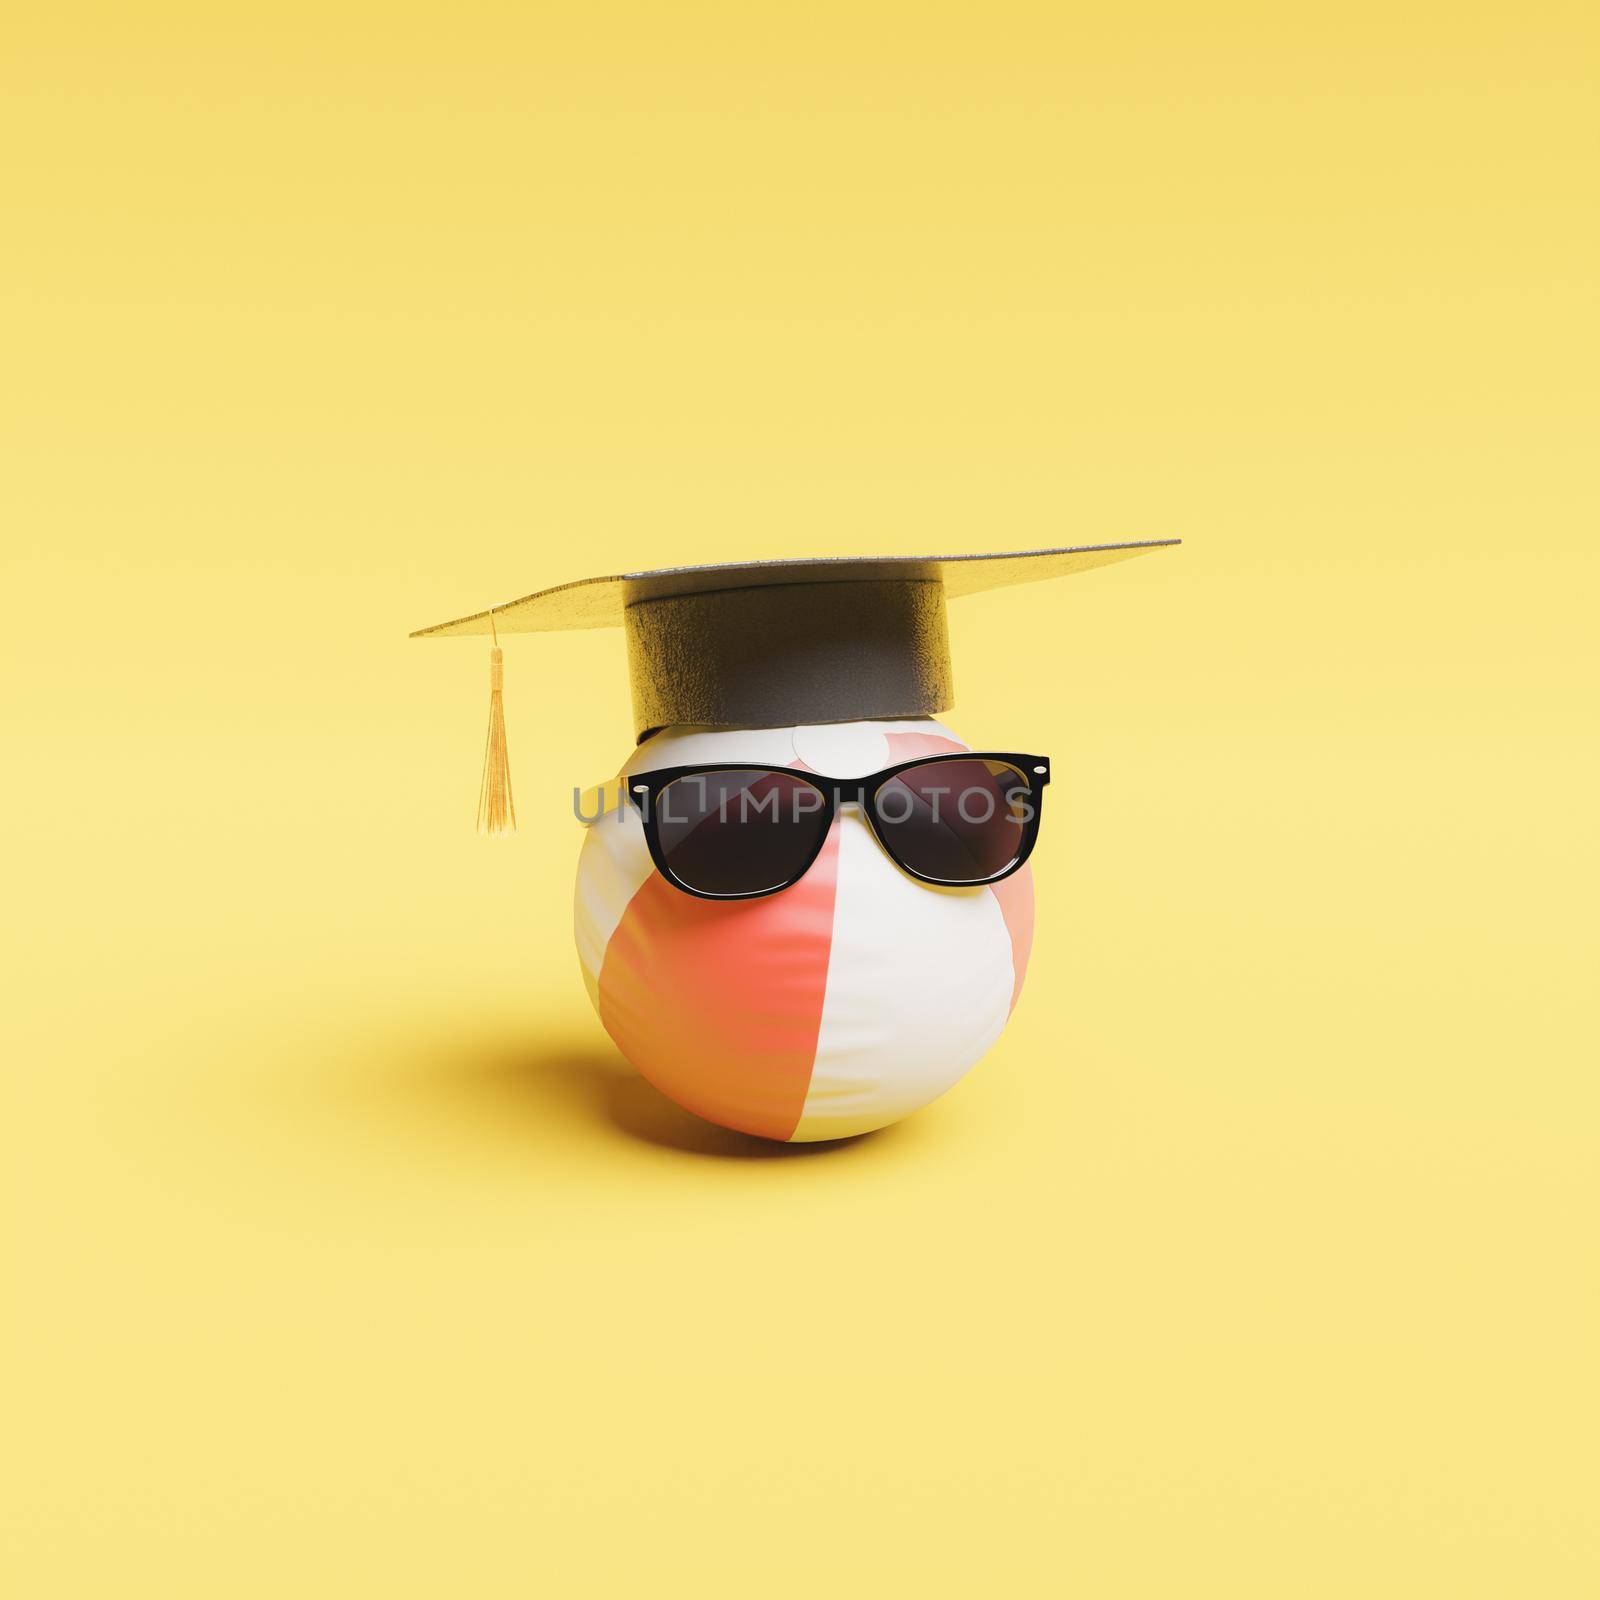 beach ball with sunglasses and graduation hat on yellow background. minimalistic scene. student vacation concept. 3d render